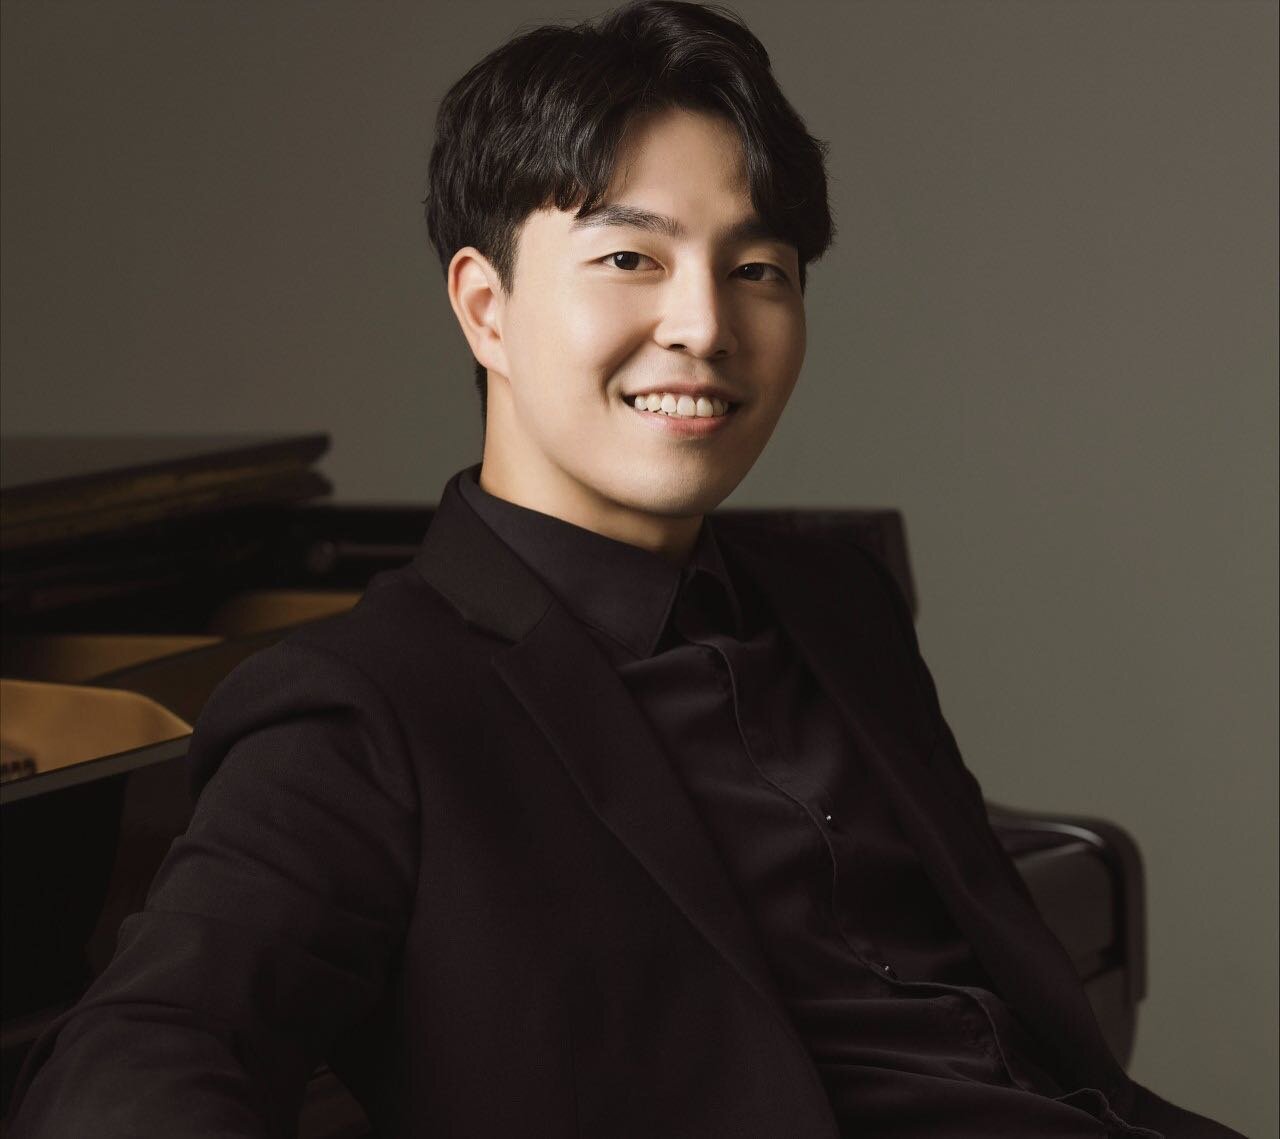 Pianist Yeontaek Oh made his concerto debut with the Wonju Philharmonic Orchestra at the age of 13. Since then, he has performed as a soloist with orchestras such as the Daegu Philharmonic Orchestra, Daejeon Pop Orchestra, Euro-Asian Orchestra, Gwang